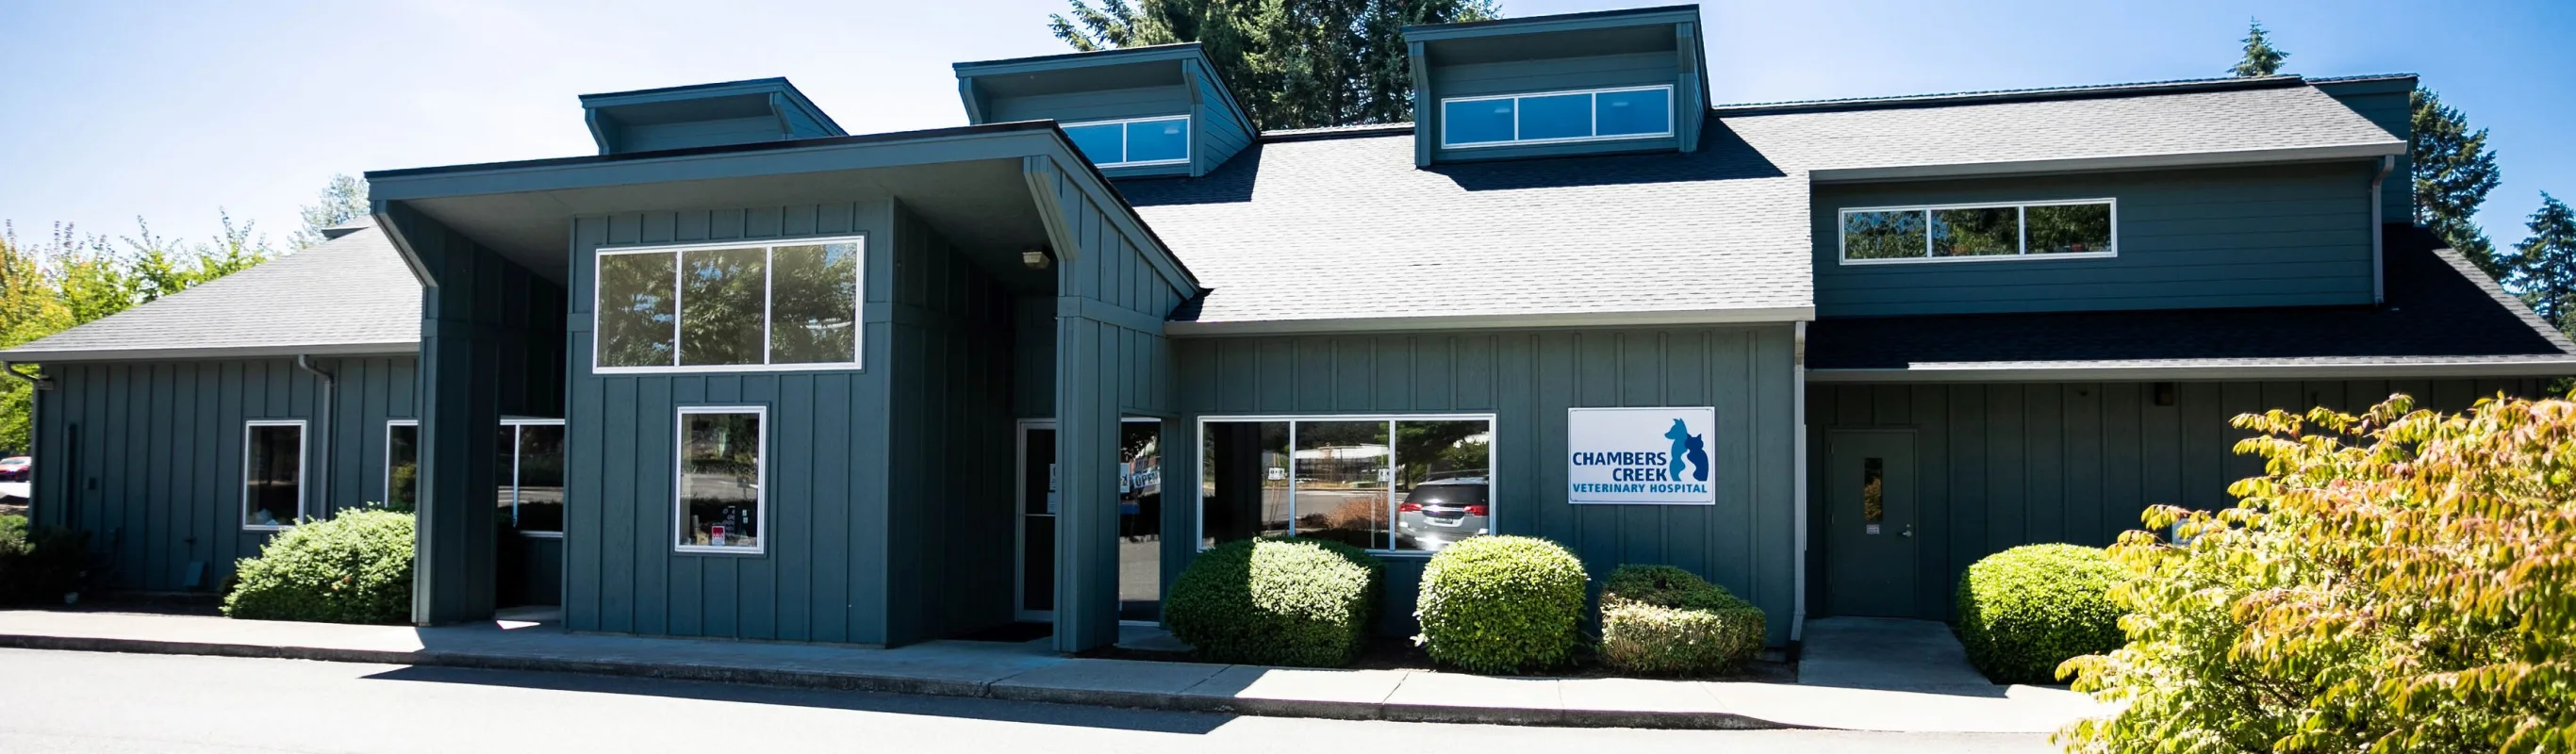 Front of Chambers Creek Veterinary Hospital 